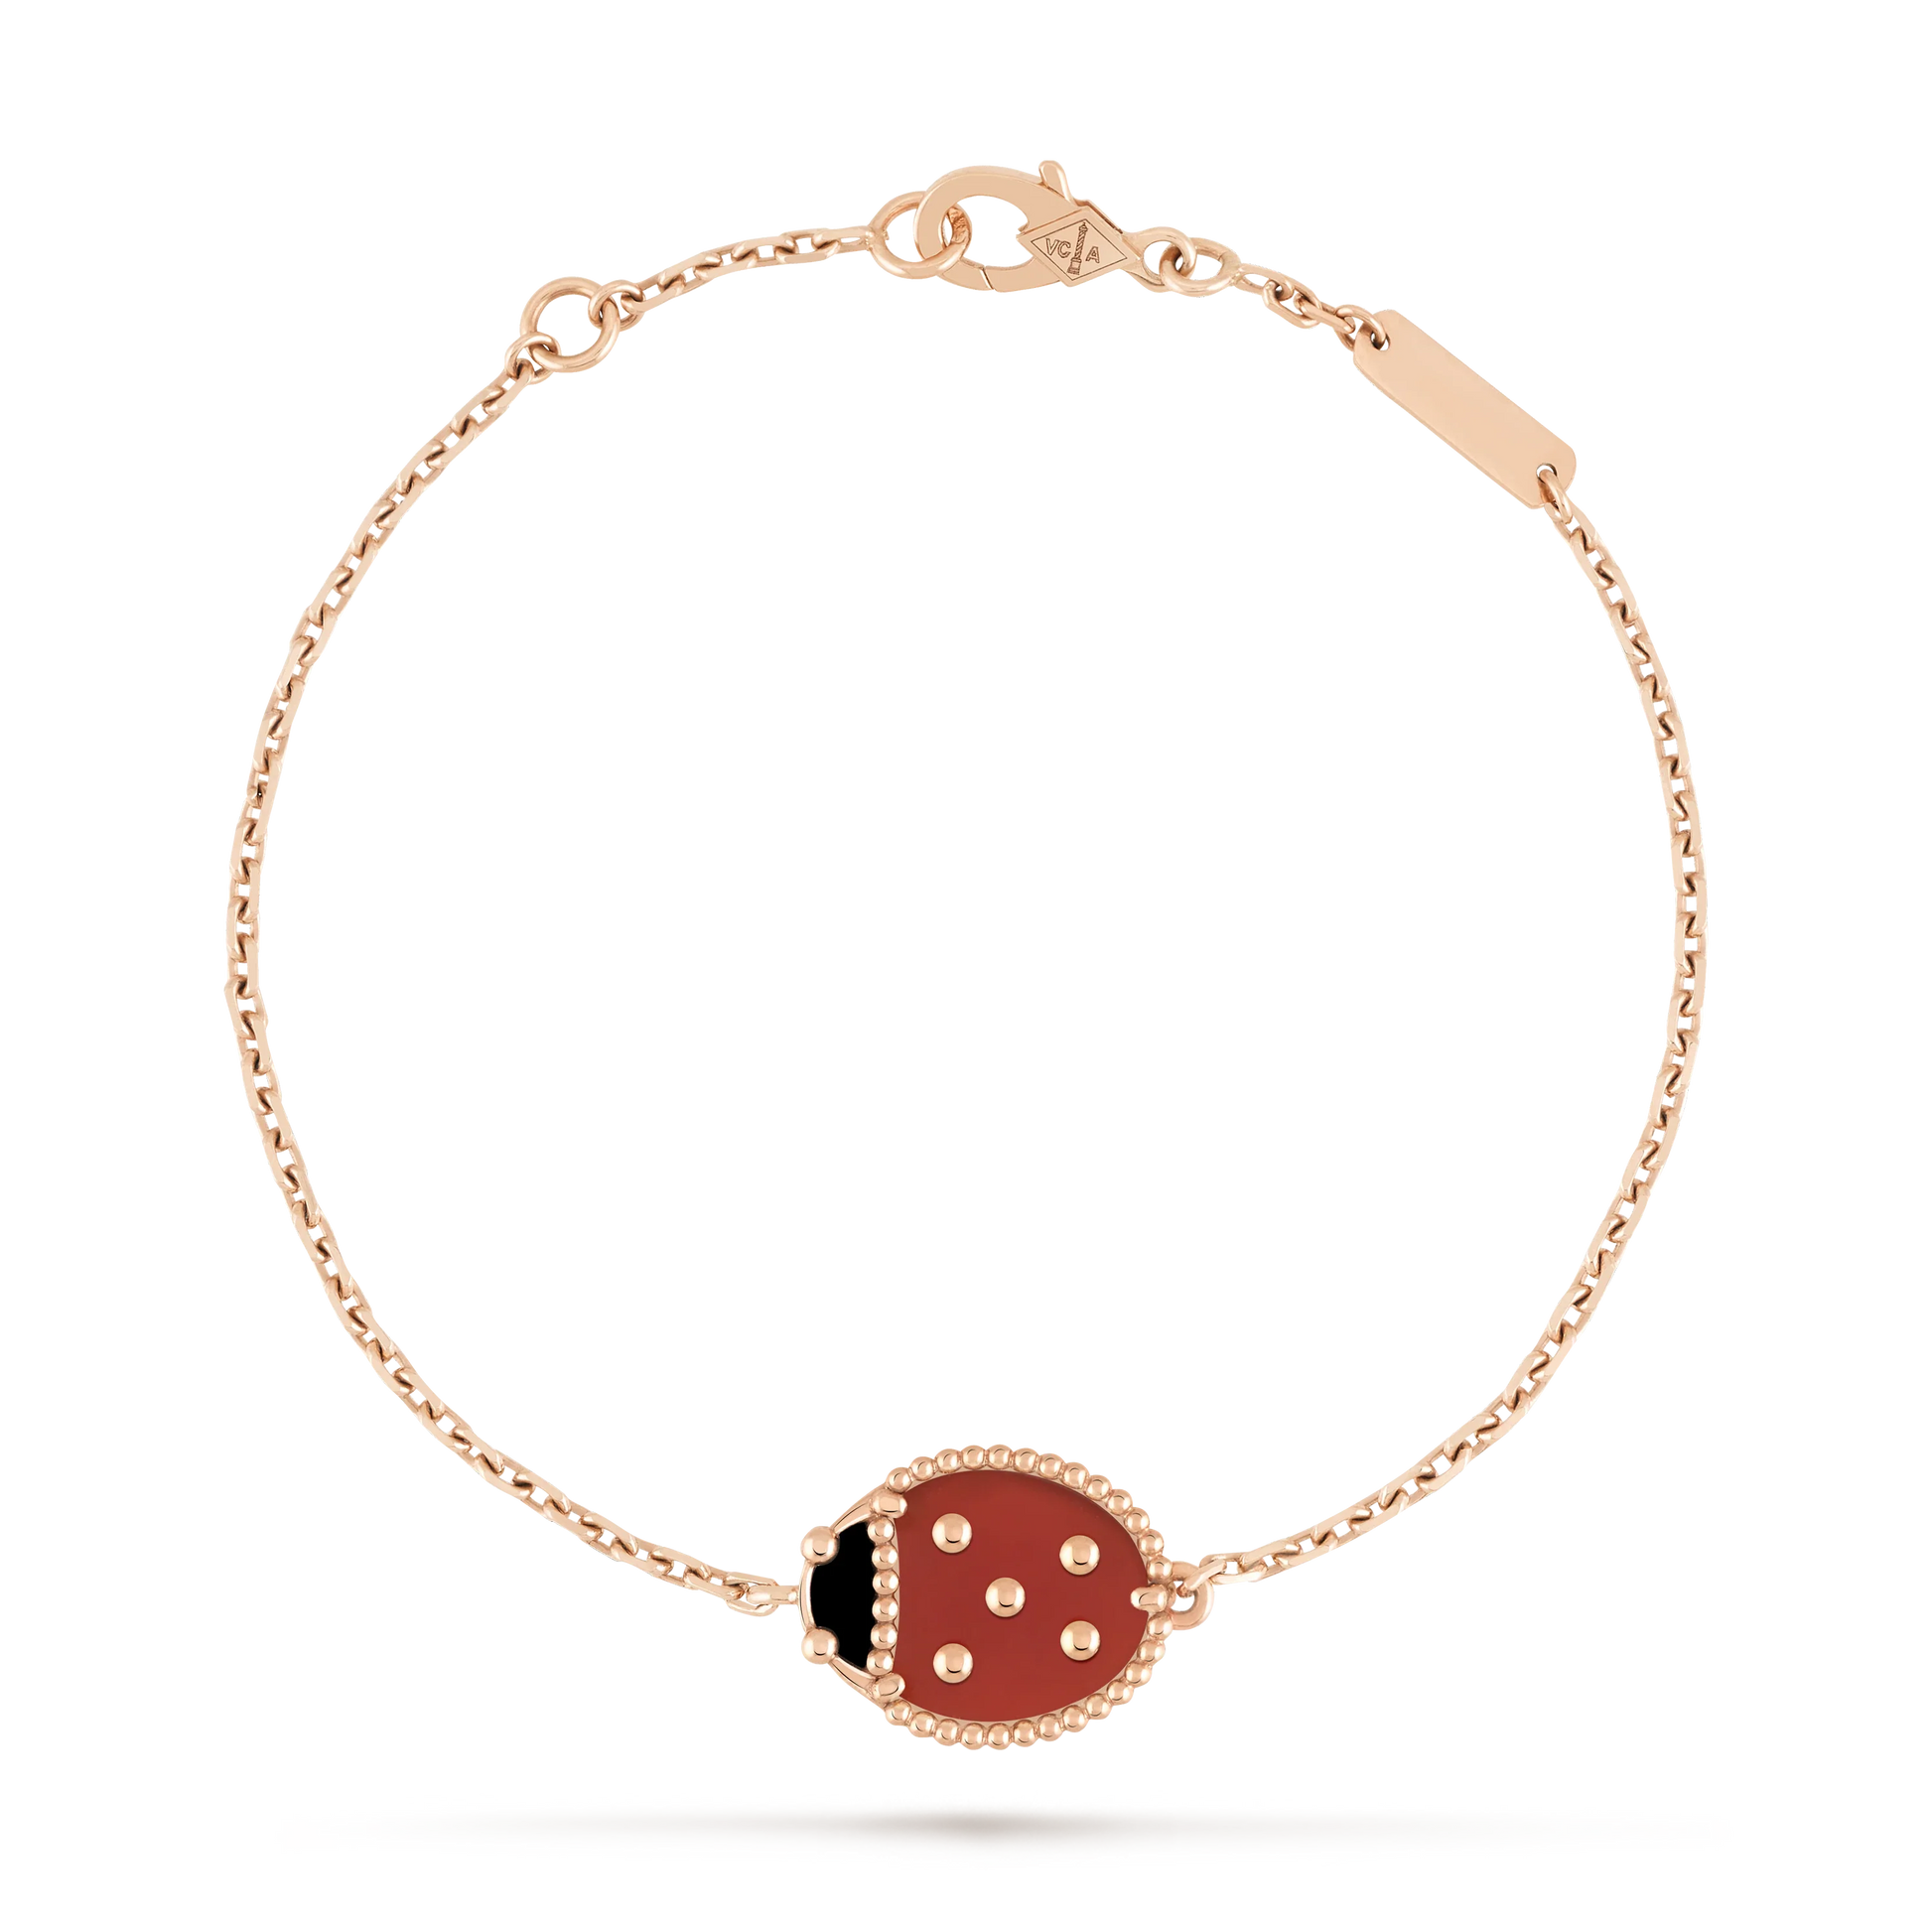 LUCKY SPRING CLOSED WINGS BUG PINK GOLD BRACELET